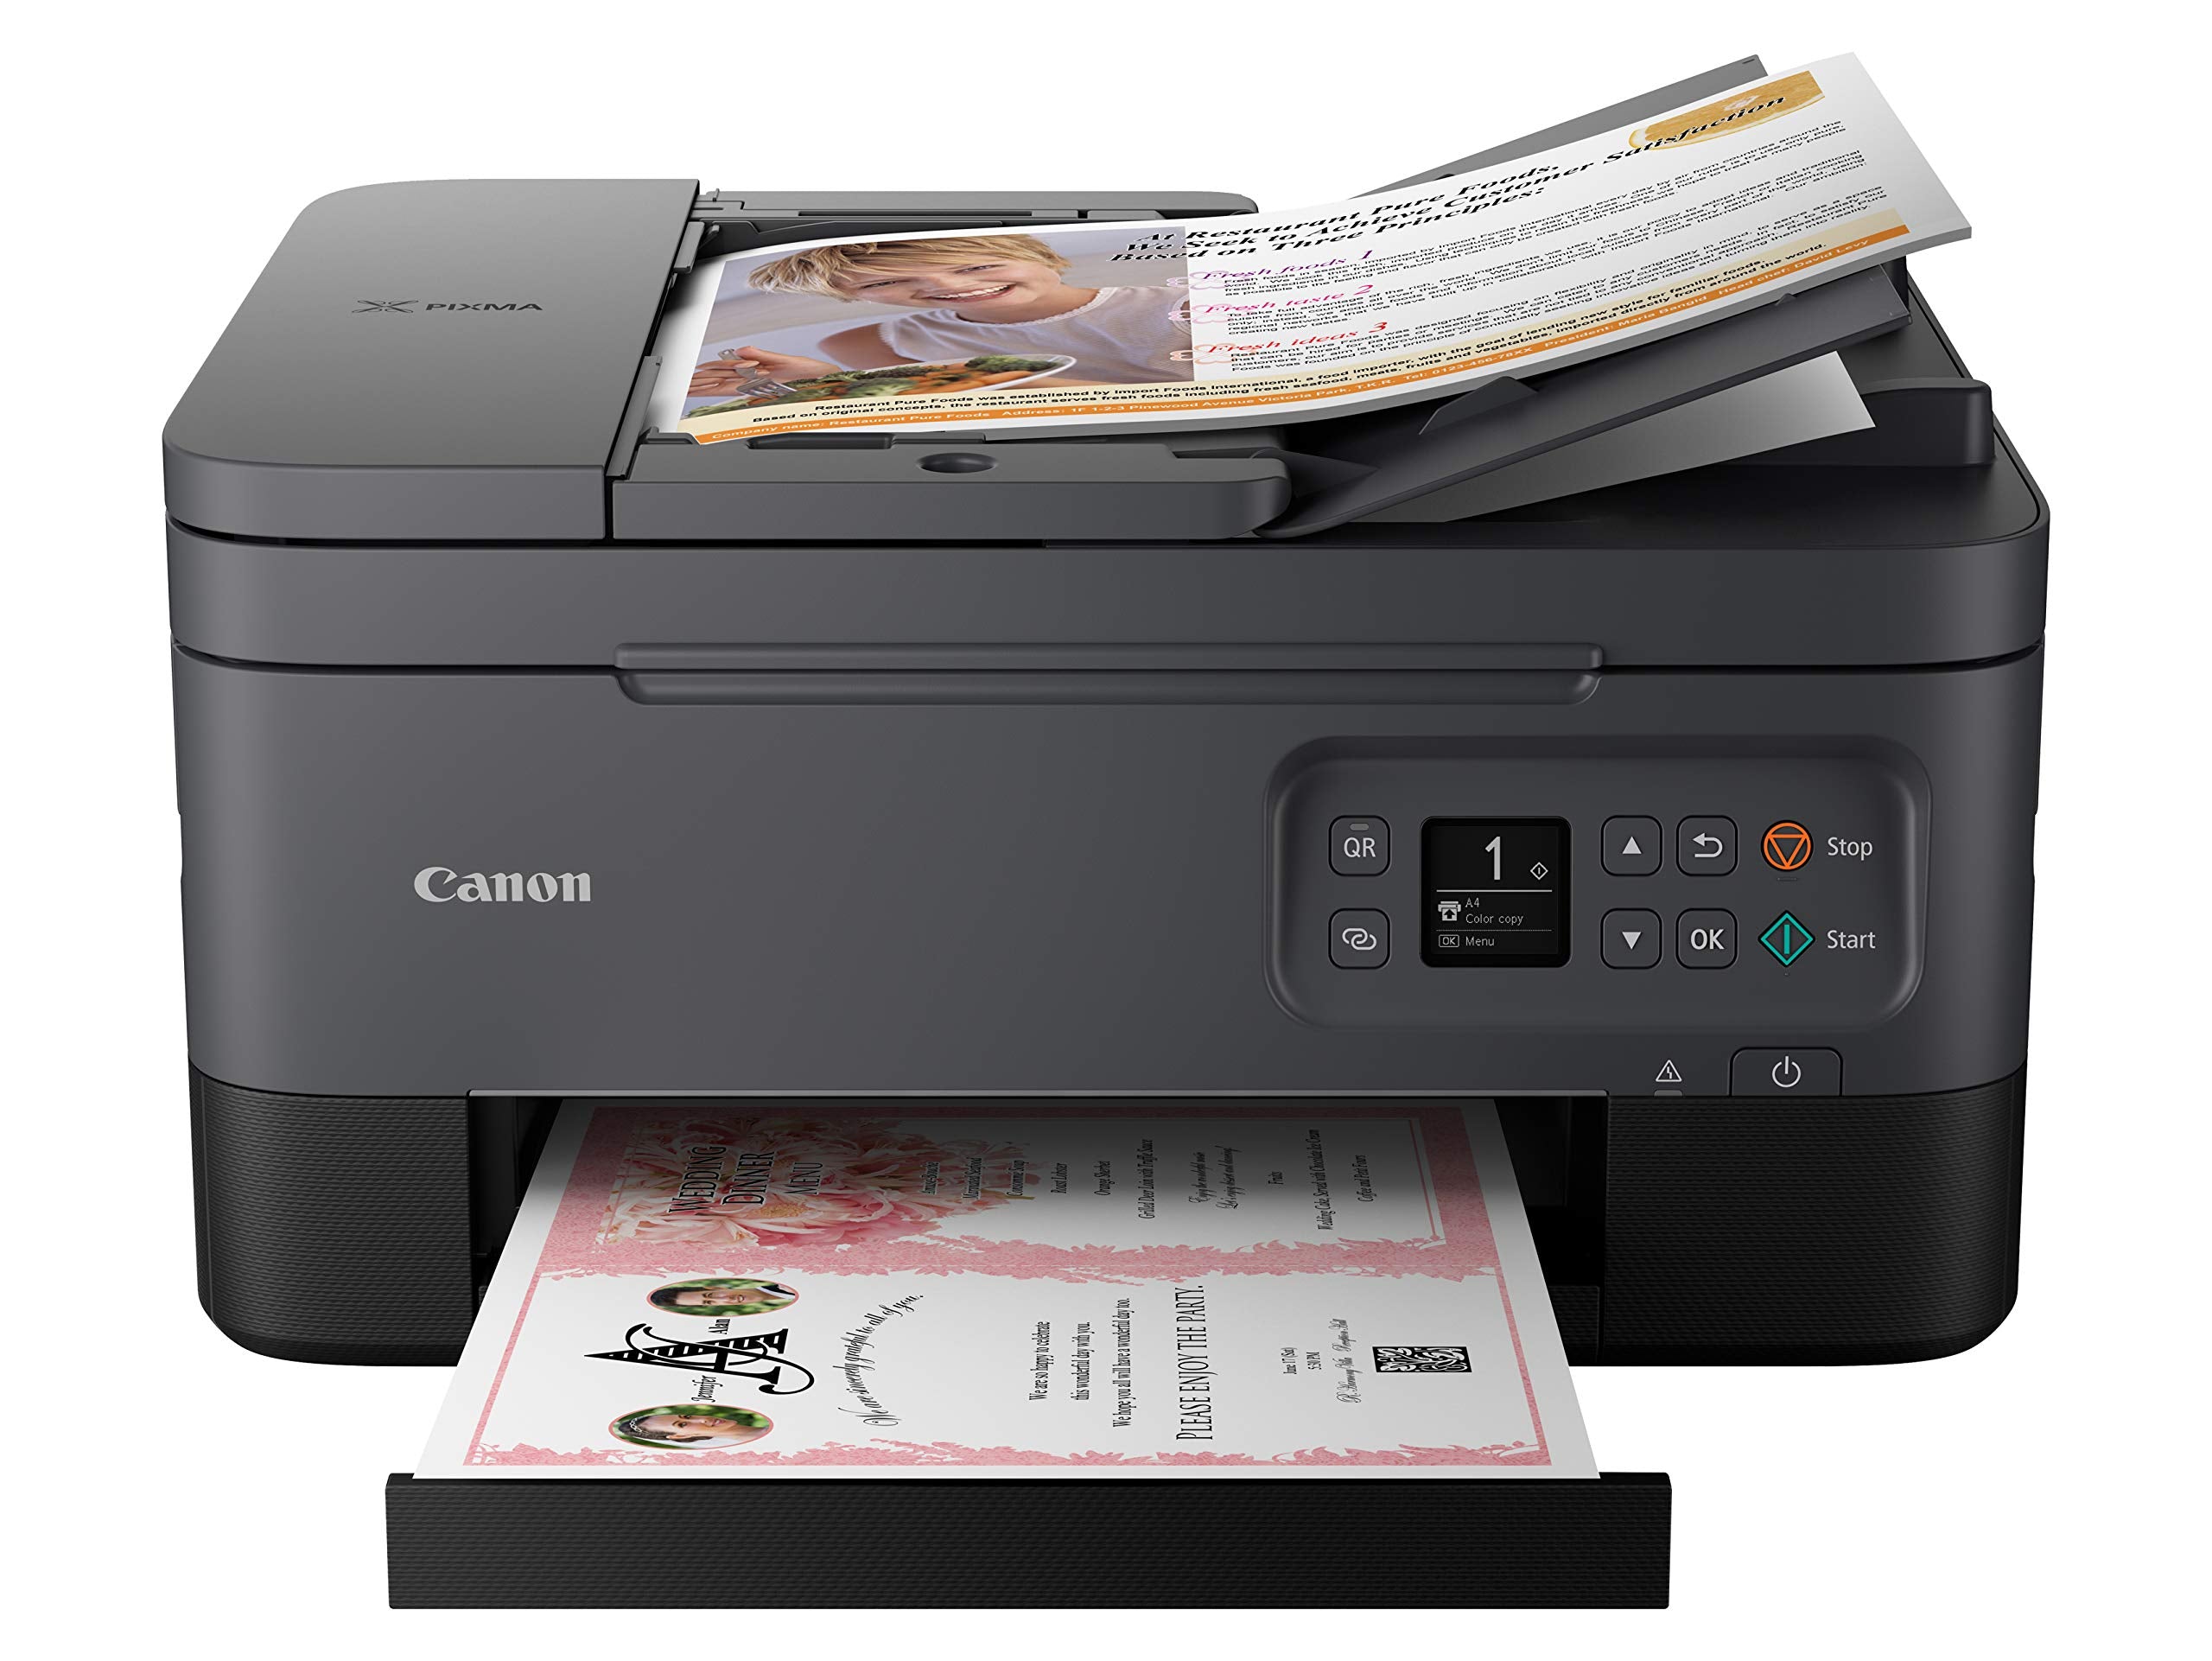 Canon TR7020 All-in-One Wireless Printer for Home Use,Black, Compact (4460C002)  - Very Good